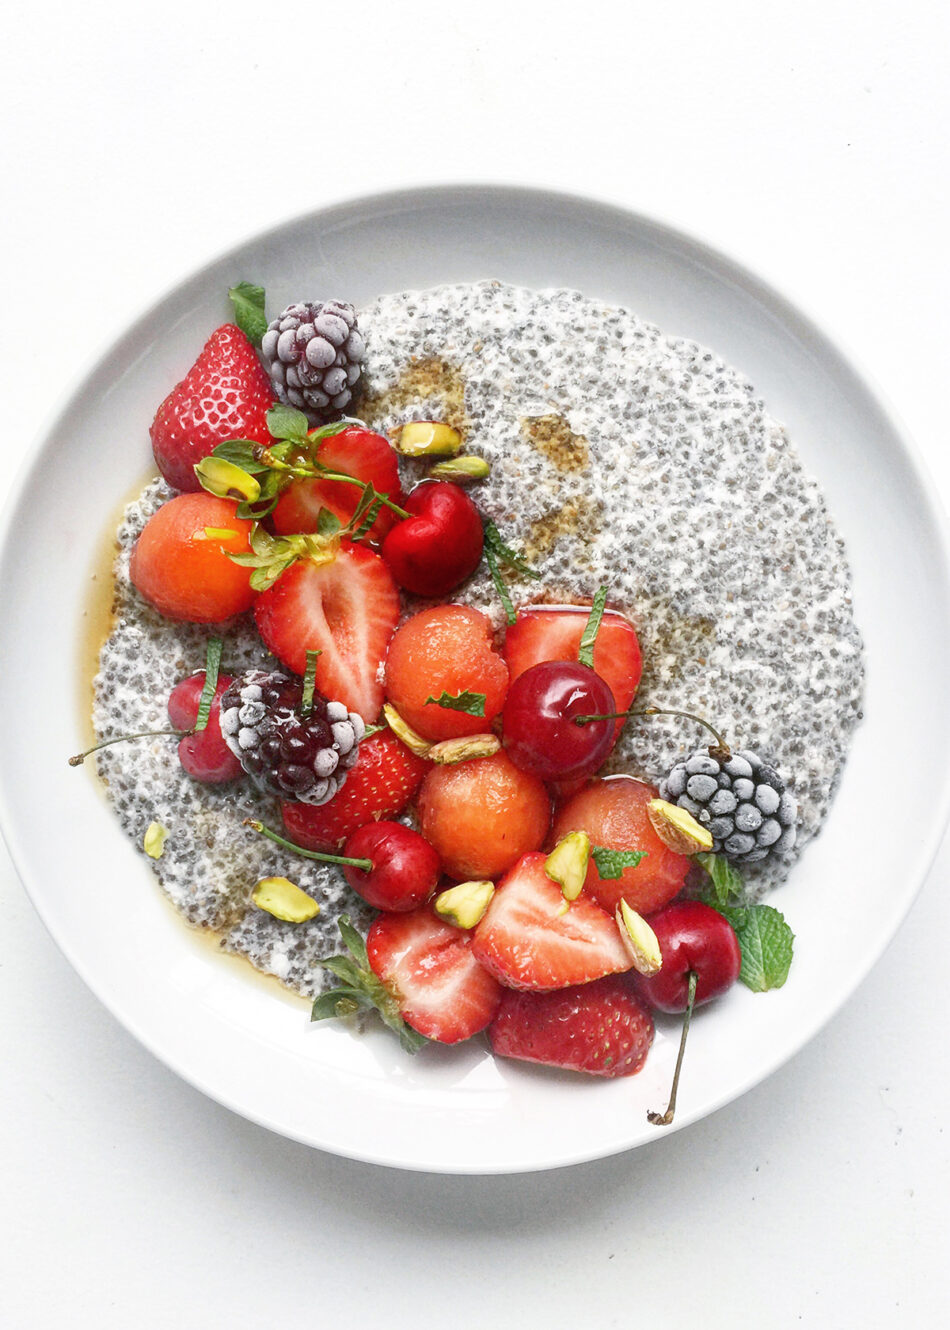 Chia Seed Pudding, Start Here for the Original – The Delicous Life